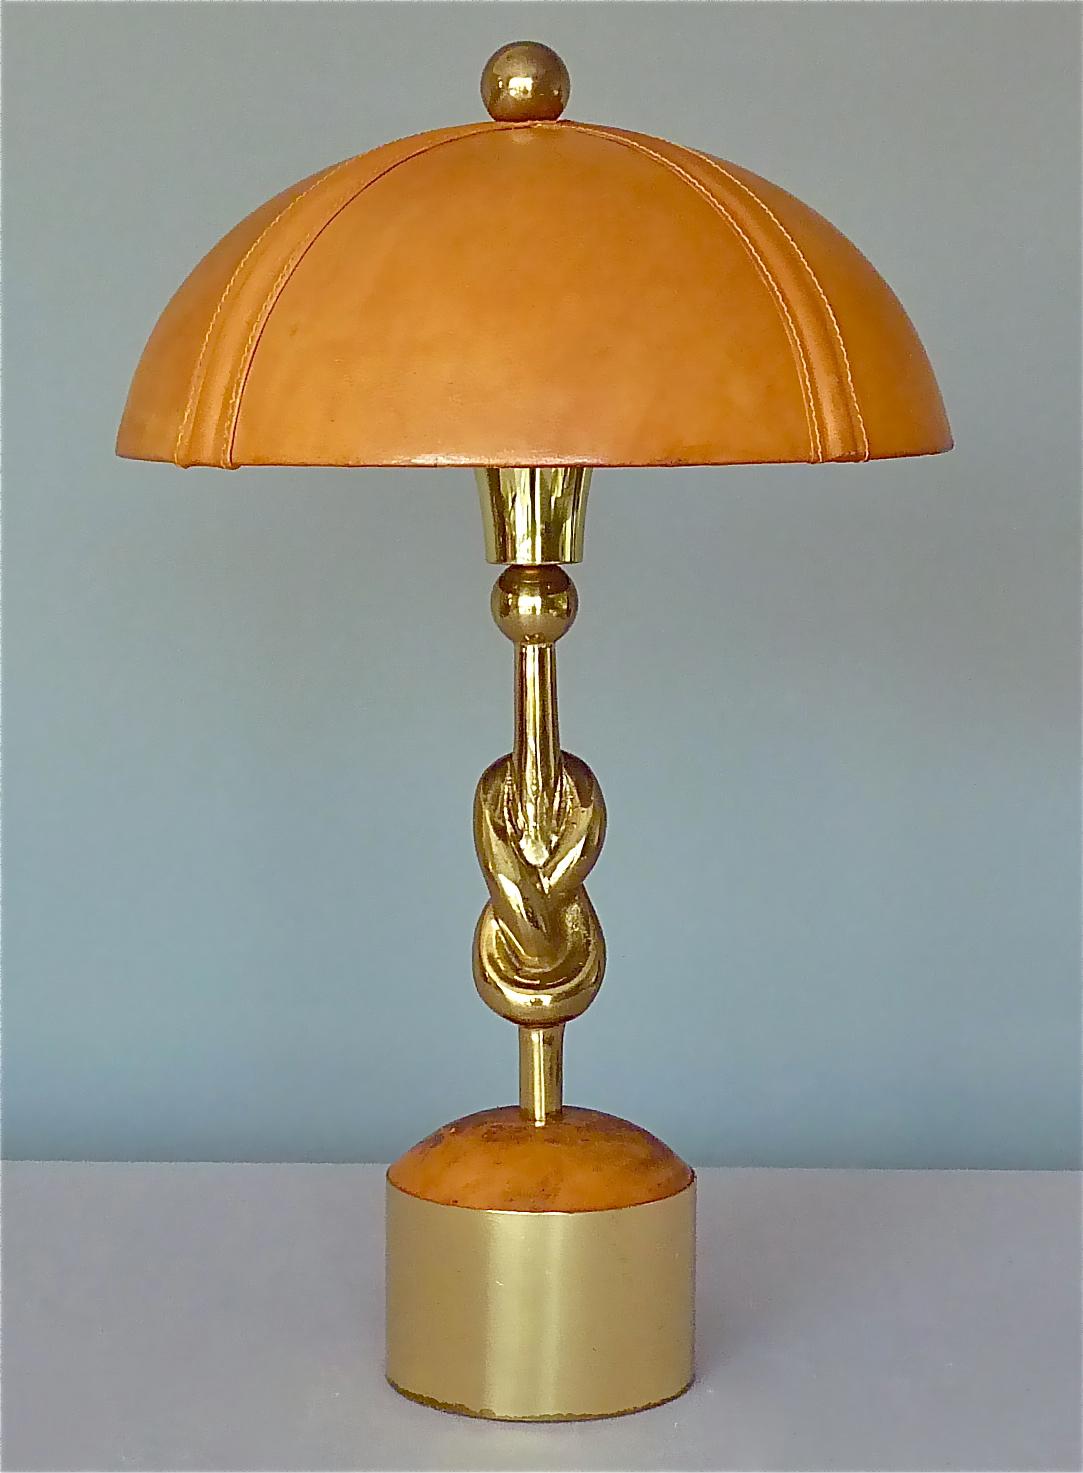 Sculptural Gilt Bronze Leather Knotted Table Lamp French 1970s Jansen Pergay Era For Sale 8